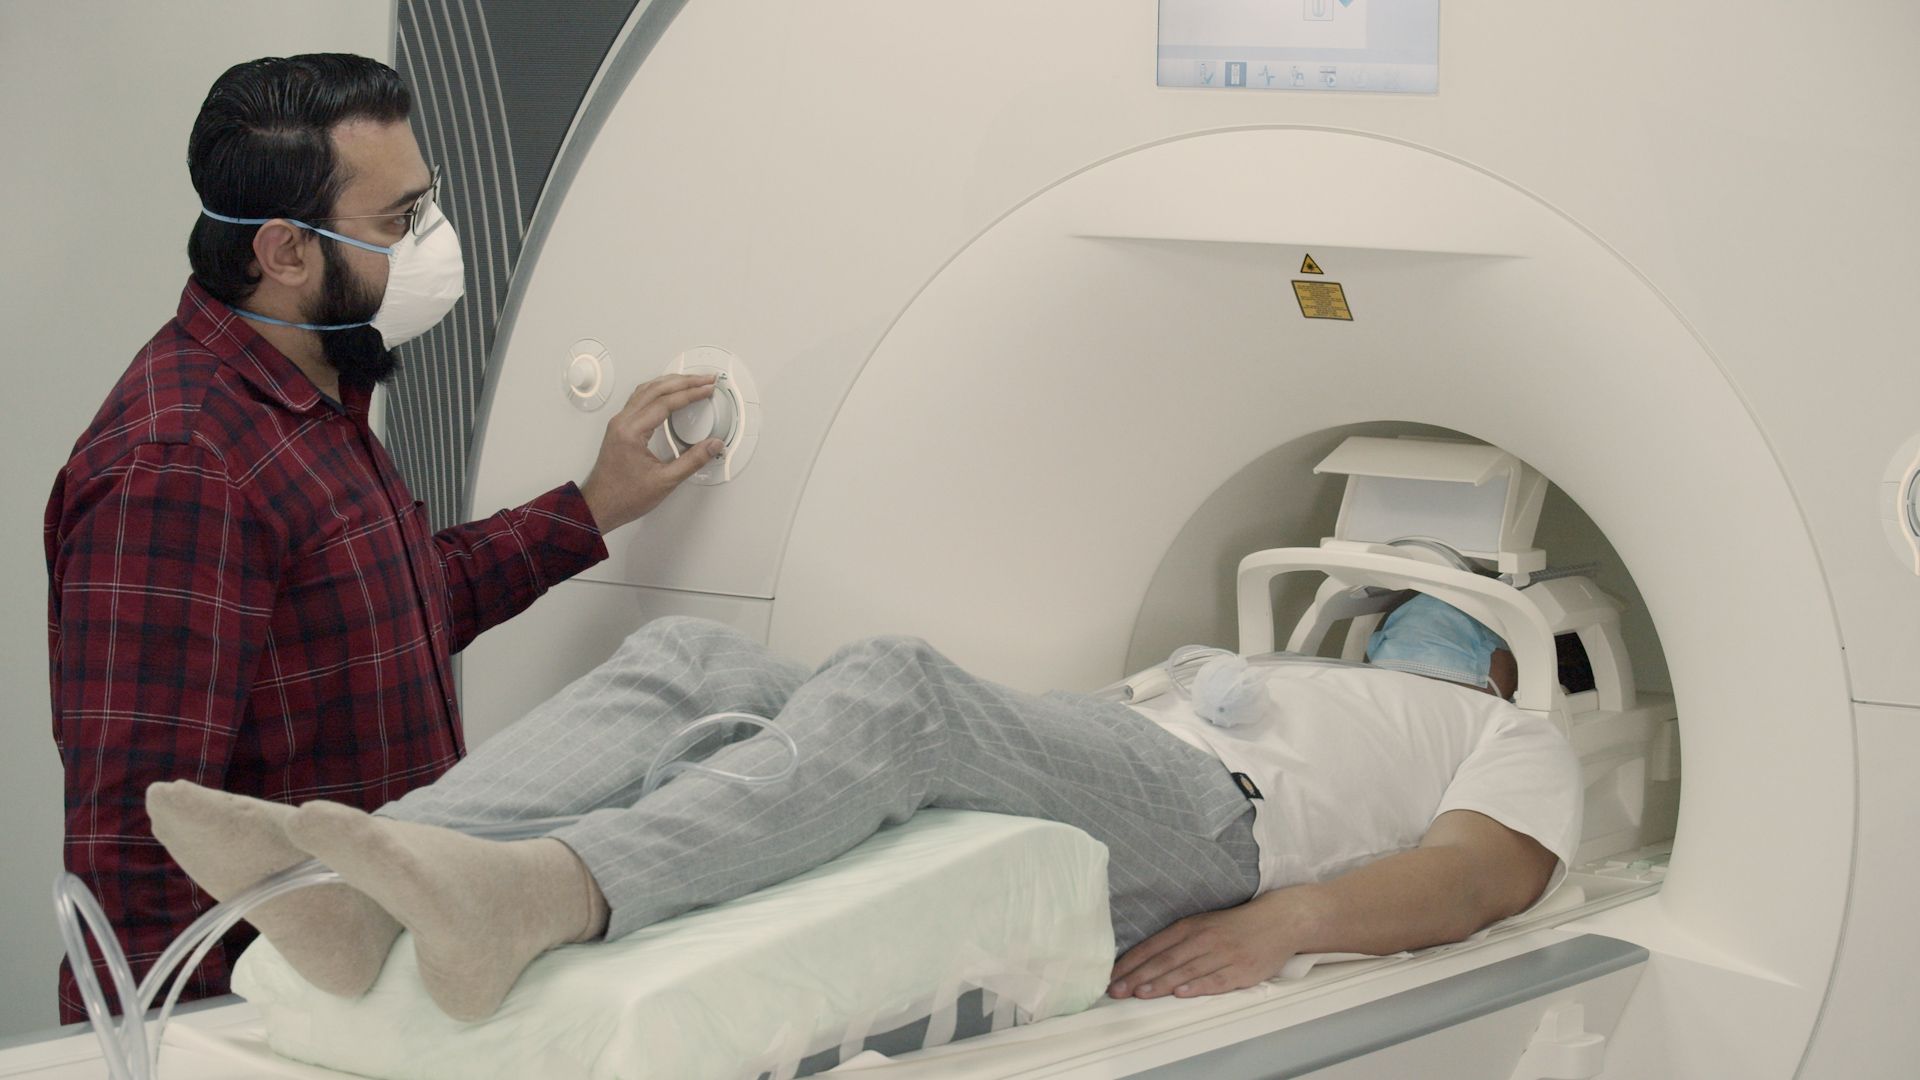 Image of a man in an MRI machine, while a scientist handles the controls